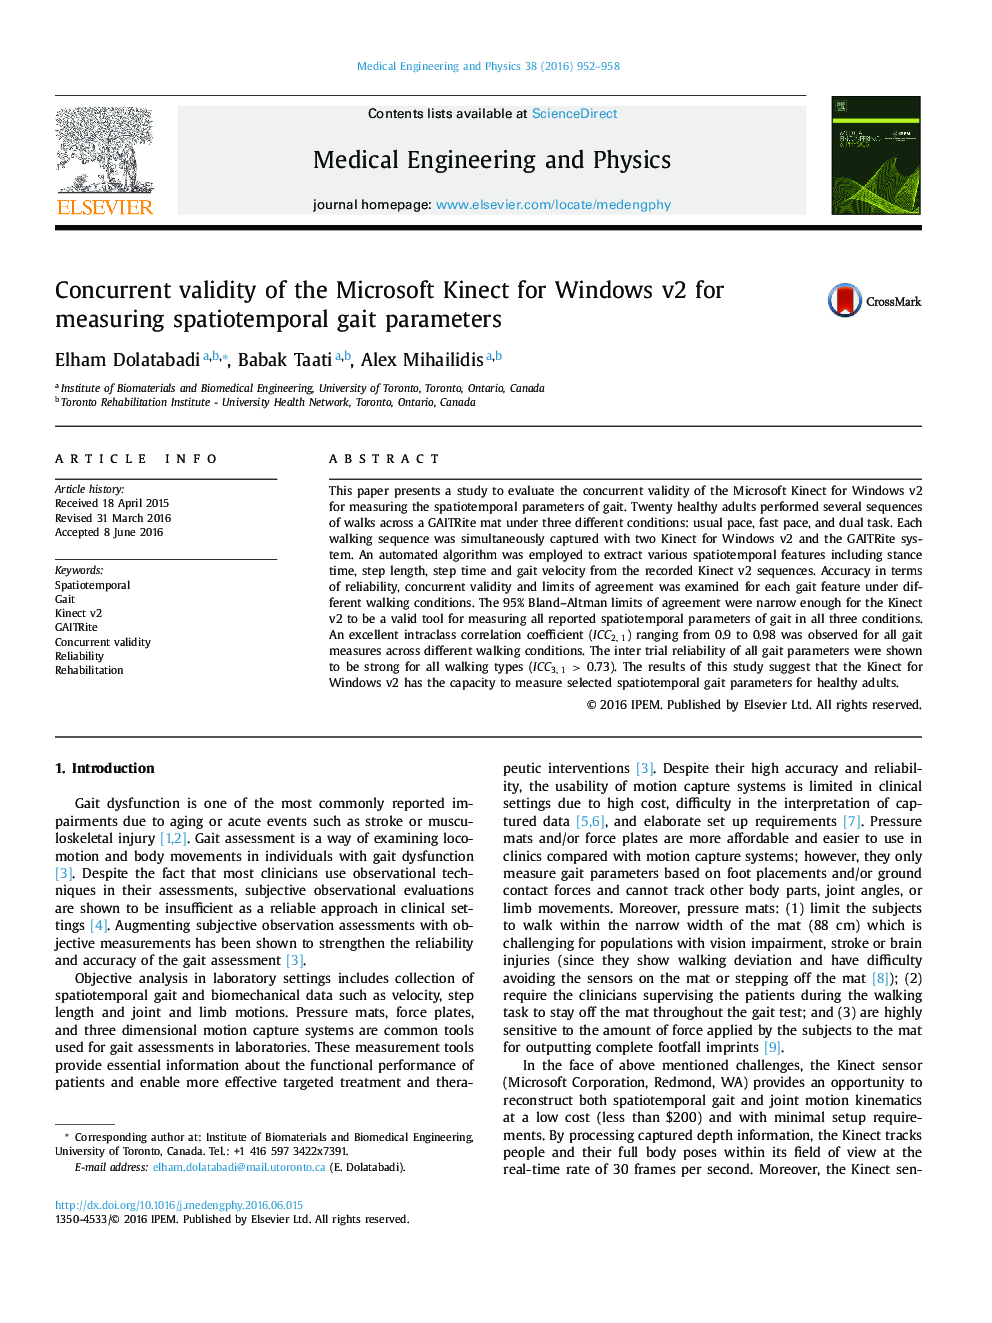 Concurrent validity of the Microsoft Kinect for Windows v2 for measuring spatiotemporal gait parameters